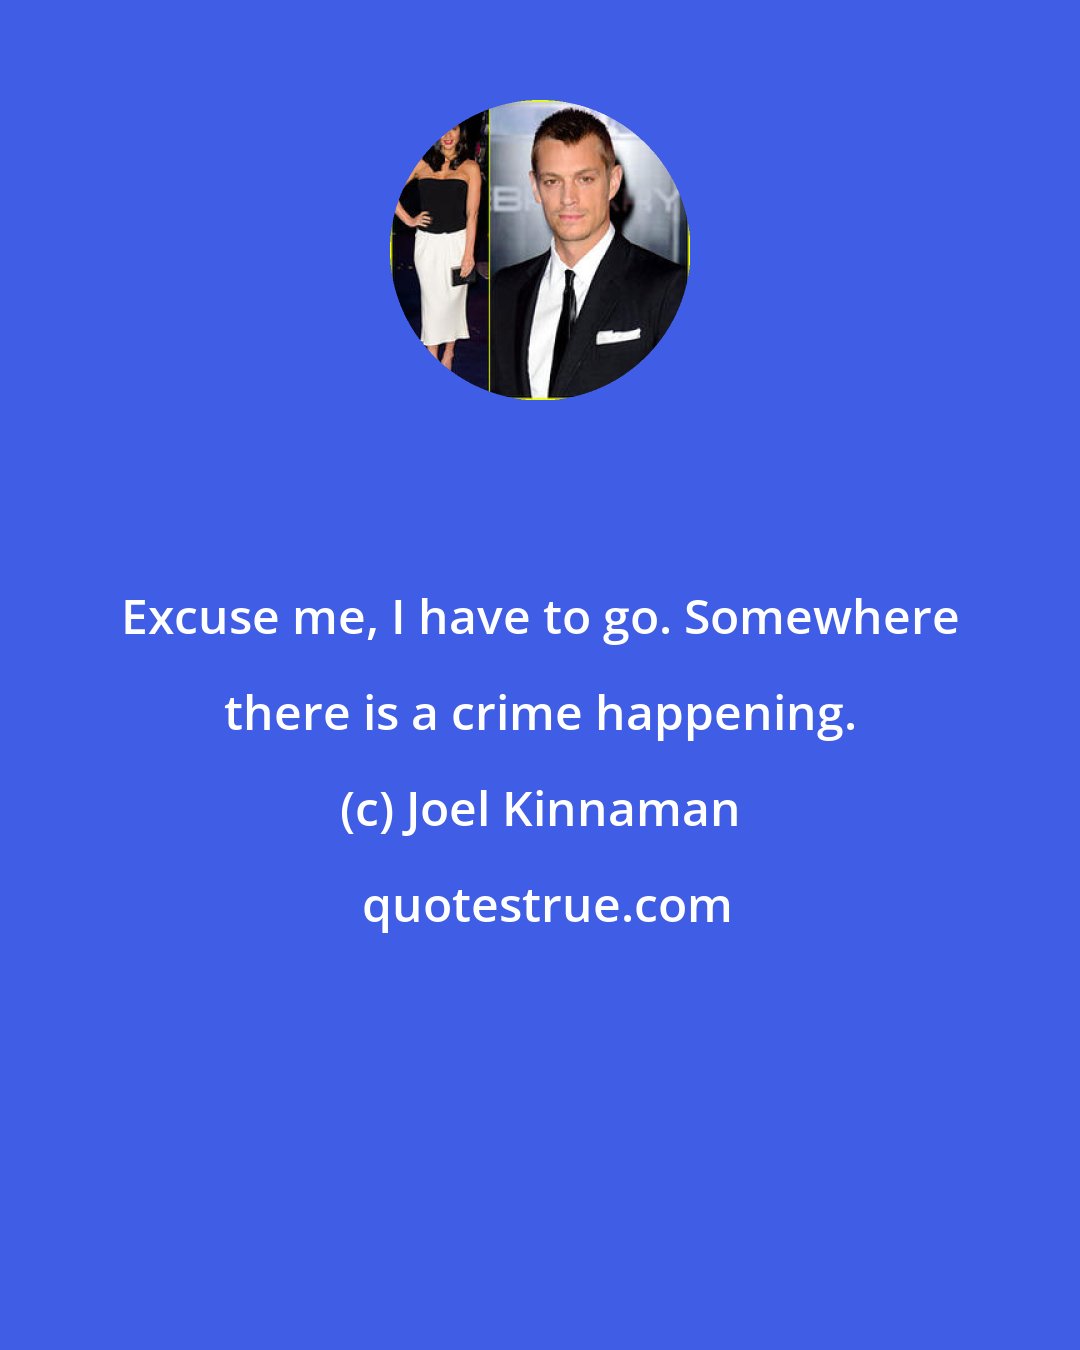 Joel Kinnaman: Excuse me, I have to go. Somewhere there is a crime happening.